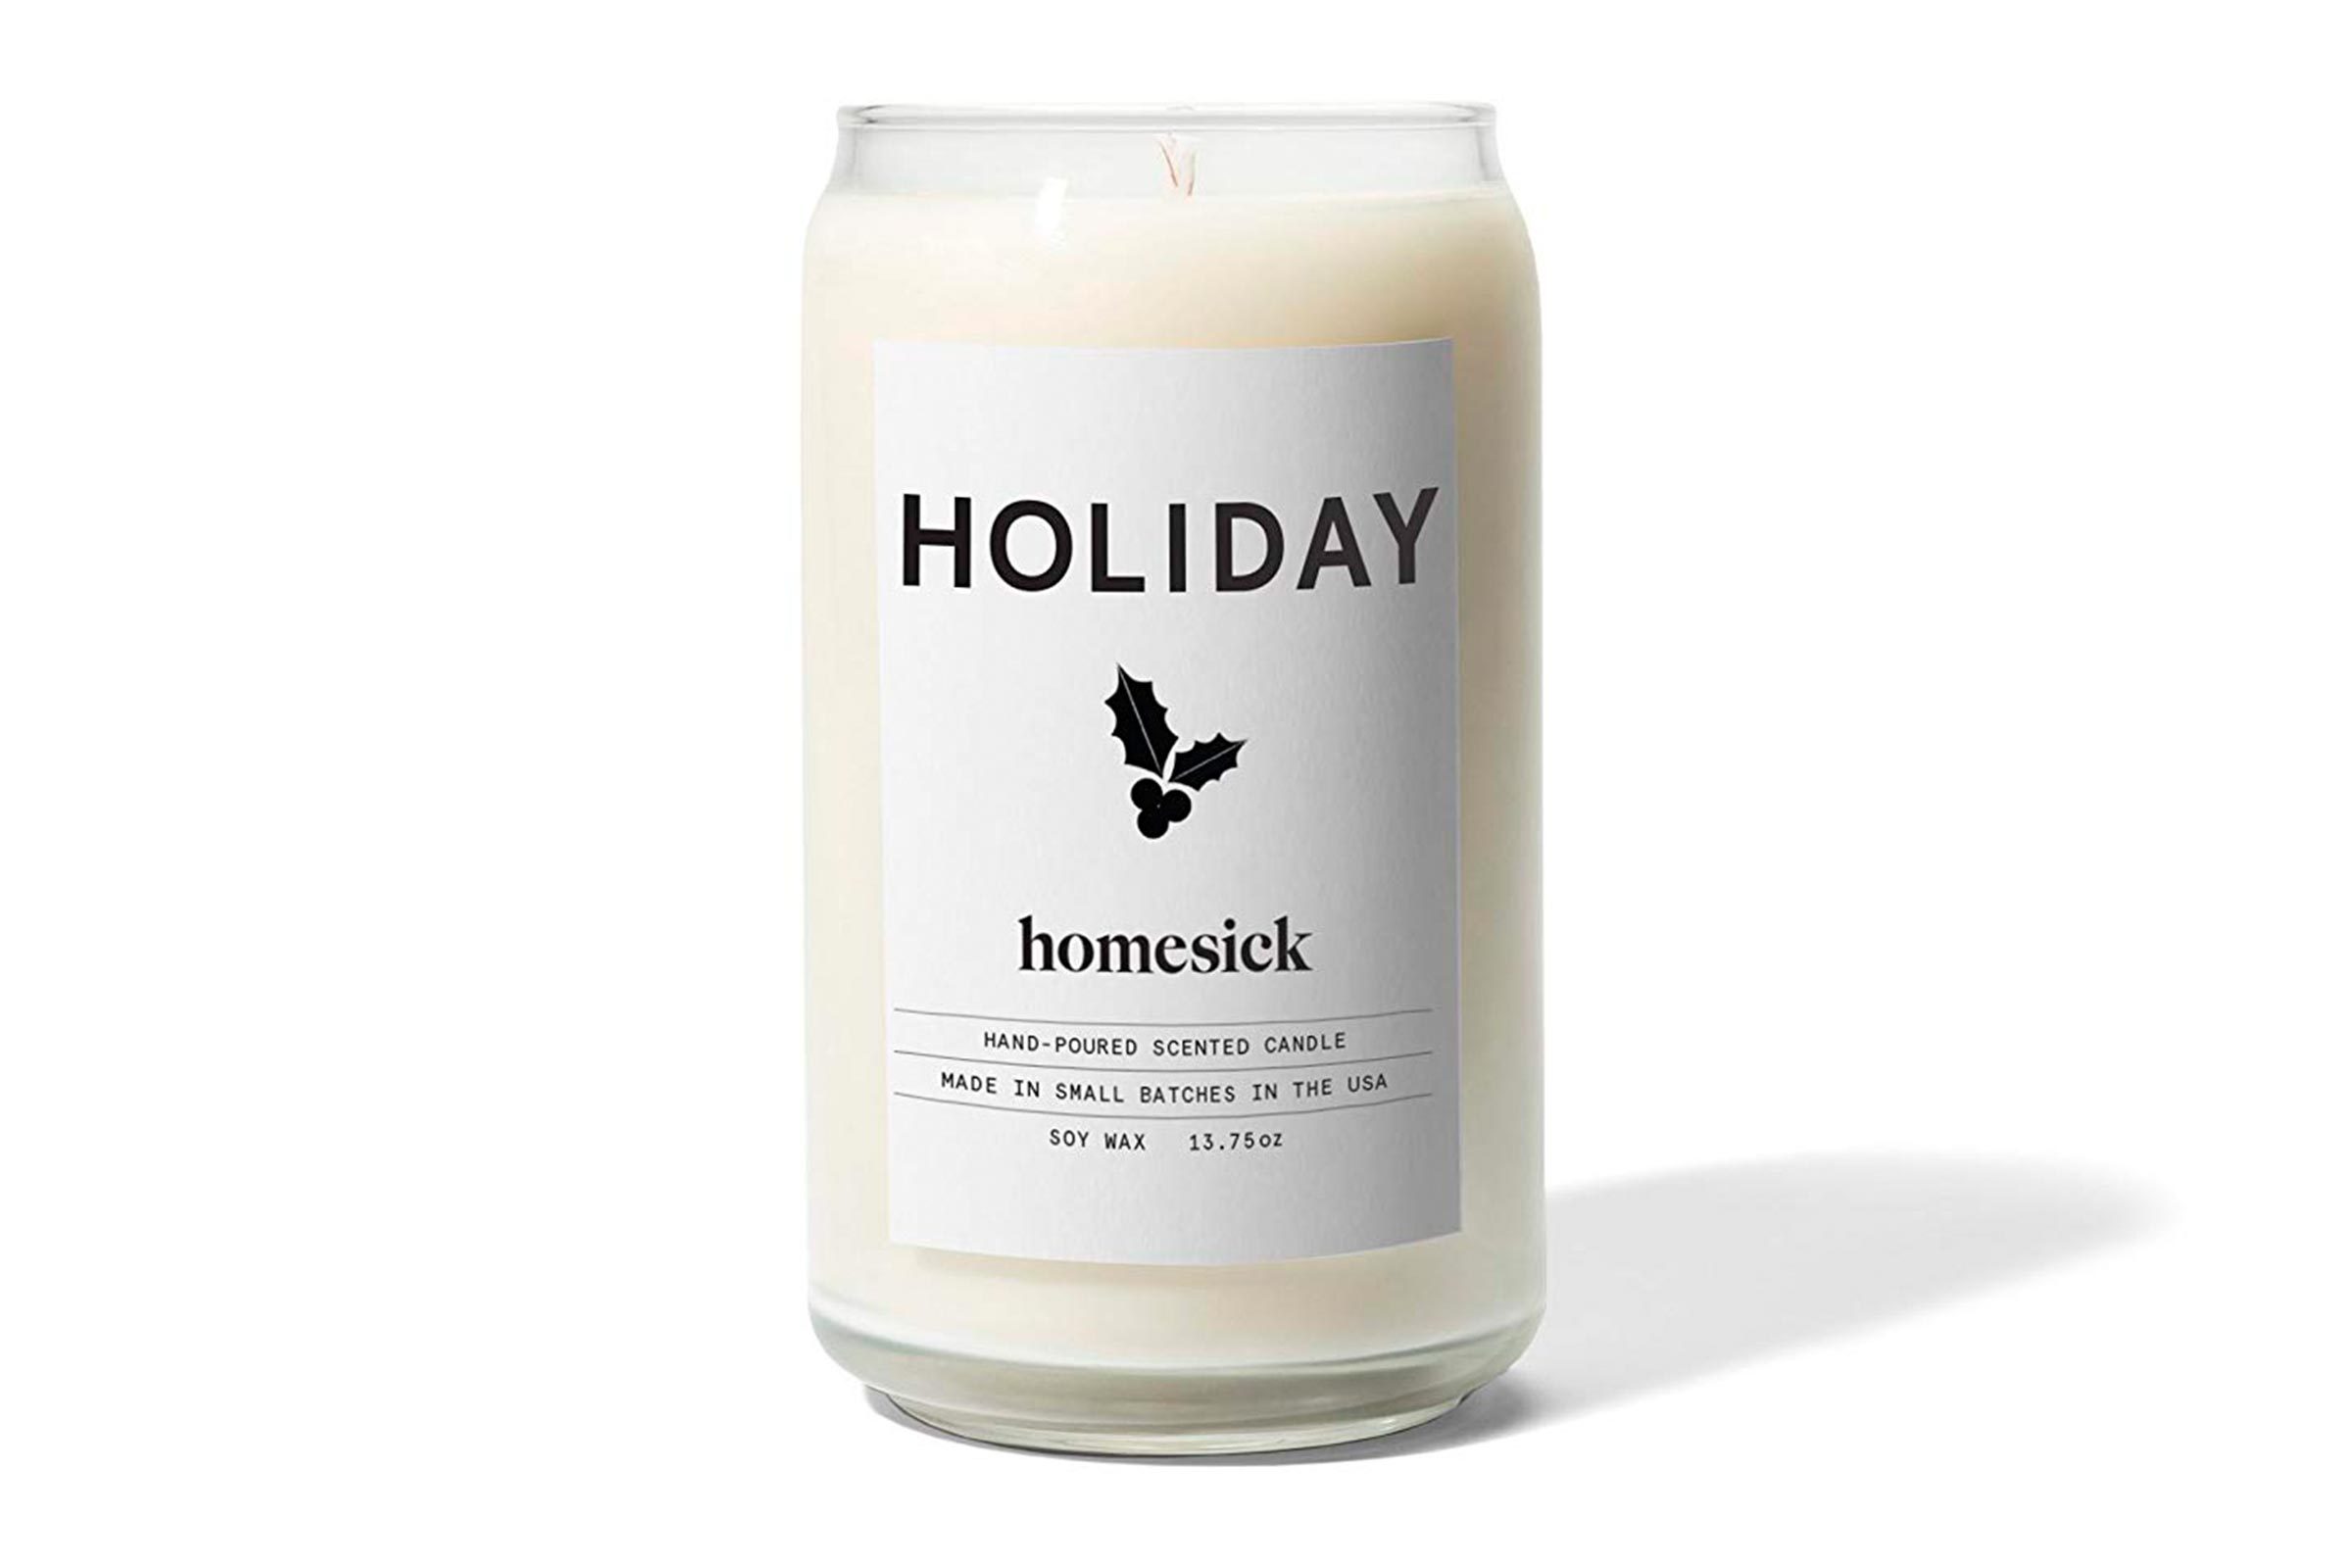 Homesick scented candle